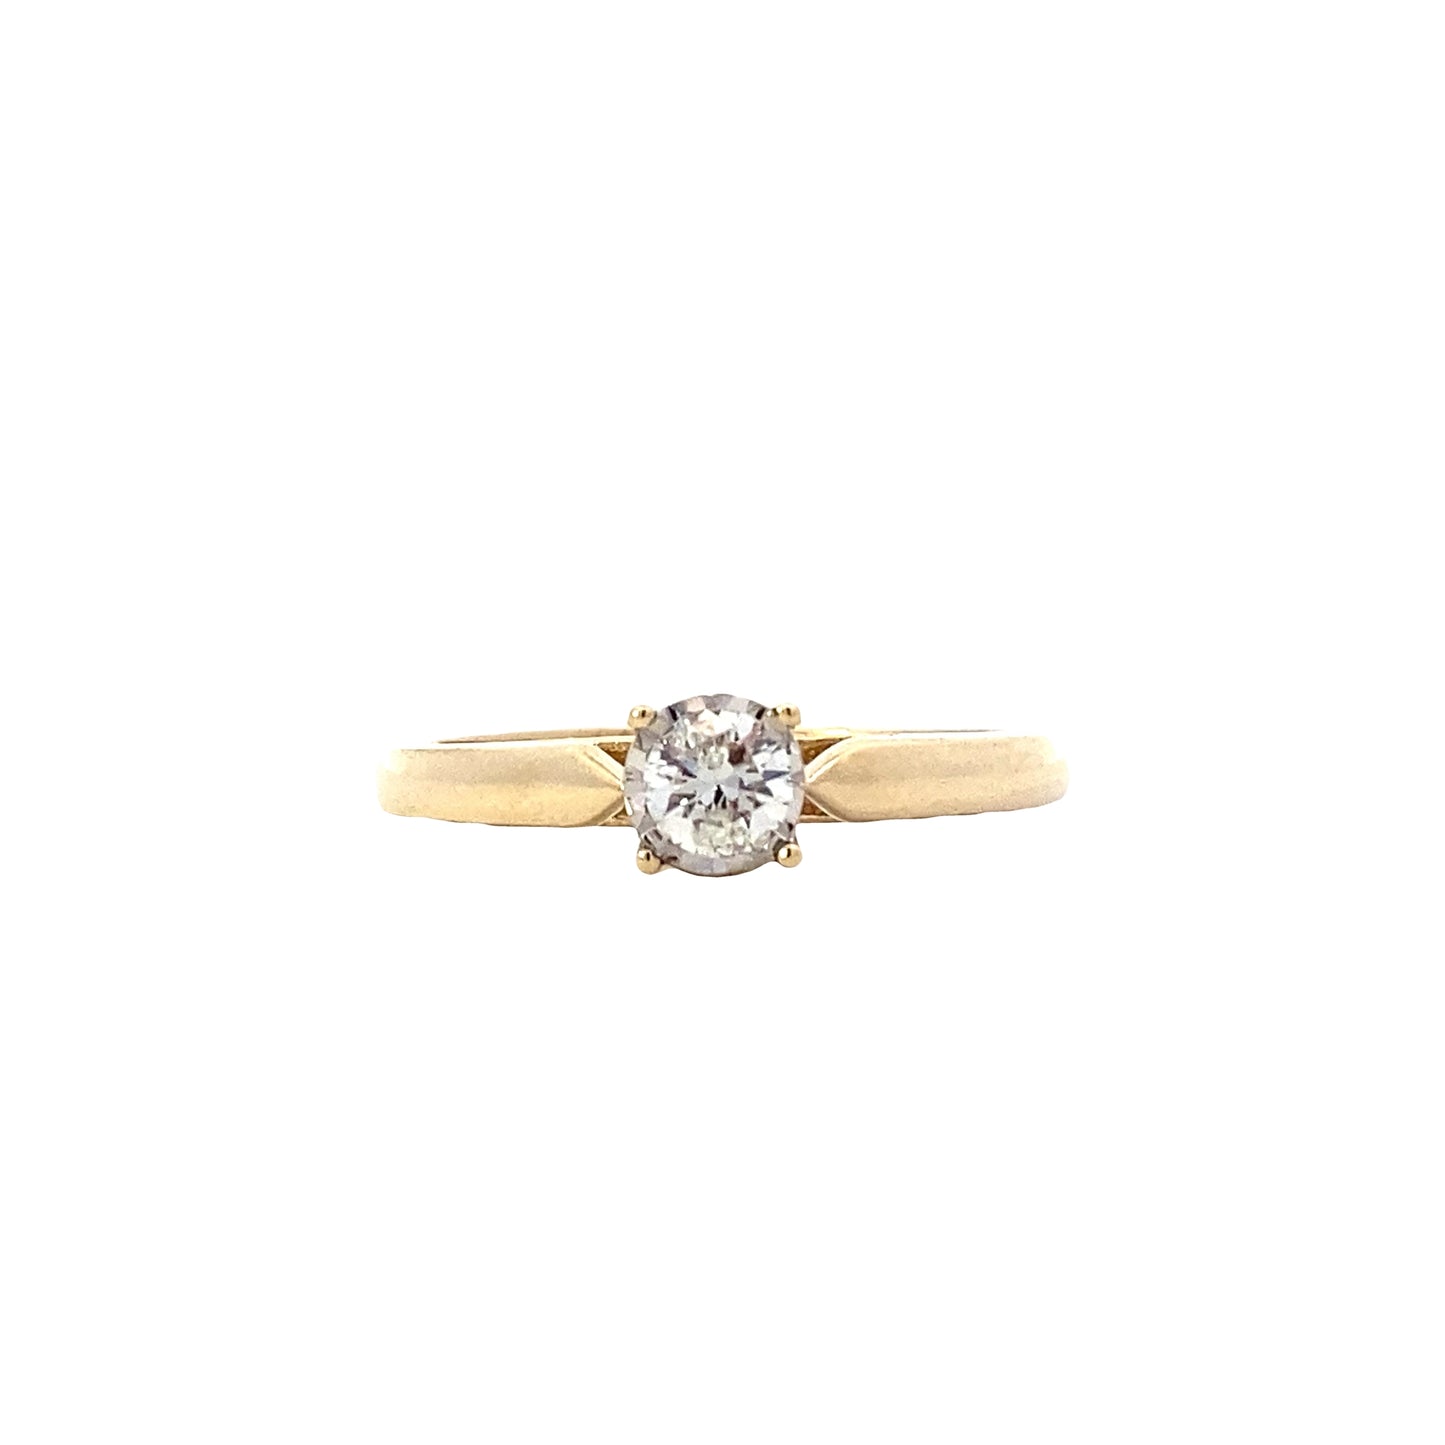 10K Yellow Gold Diamond Solitaire Ring - 0.34ct